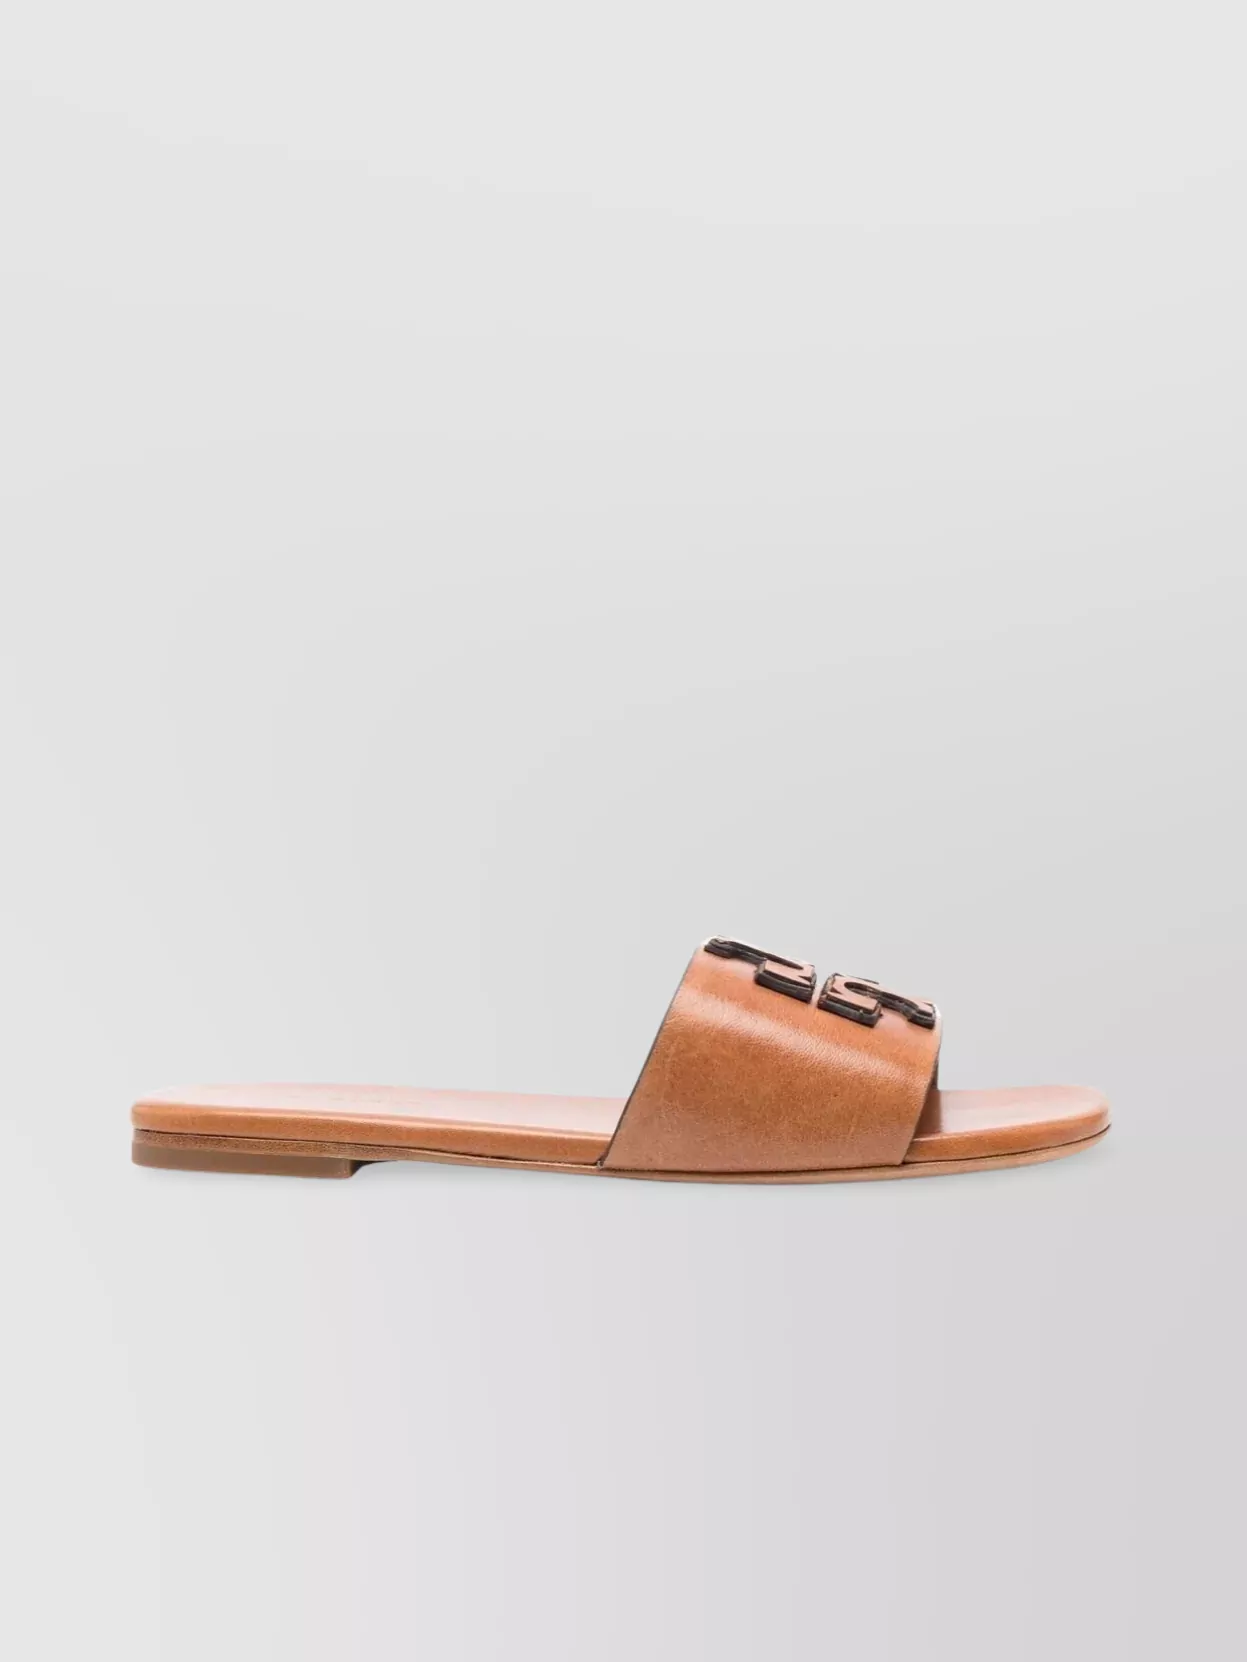 Shop Tory Burch Open Toe Leather T-strap Sandals